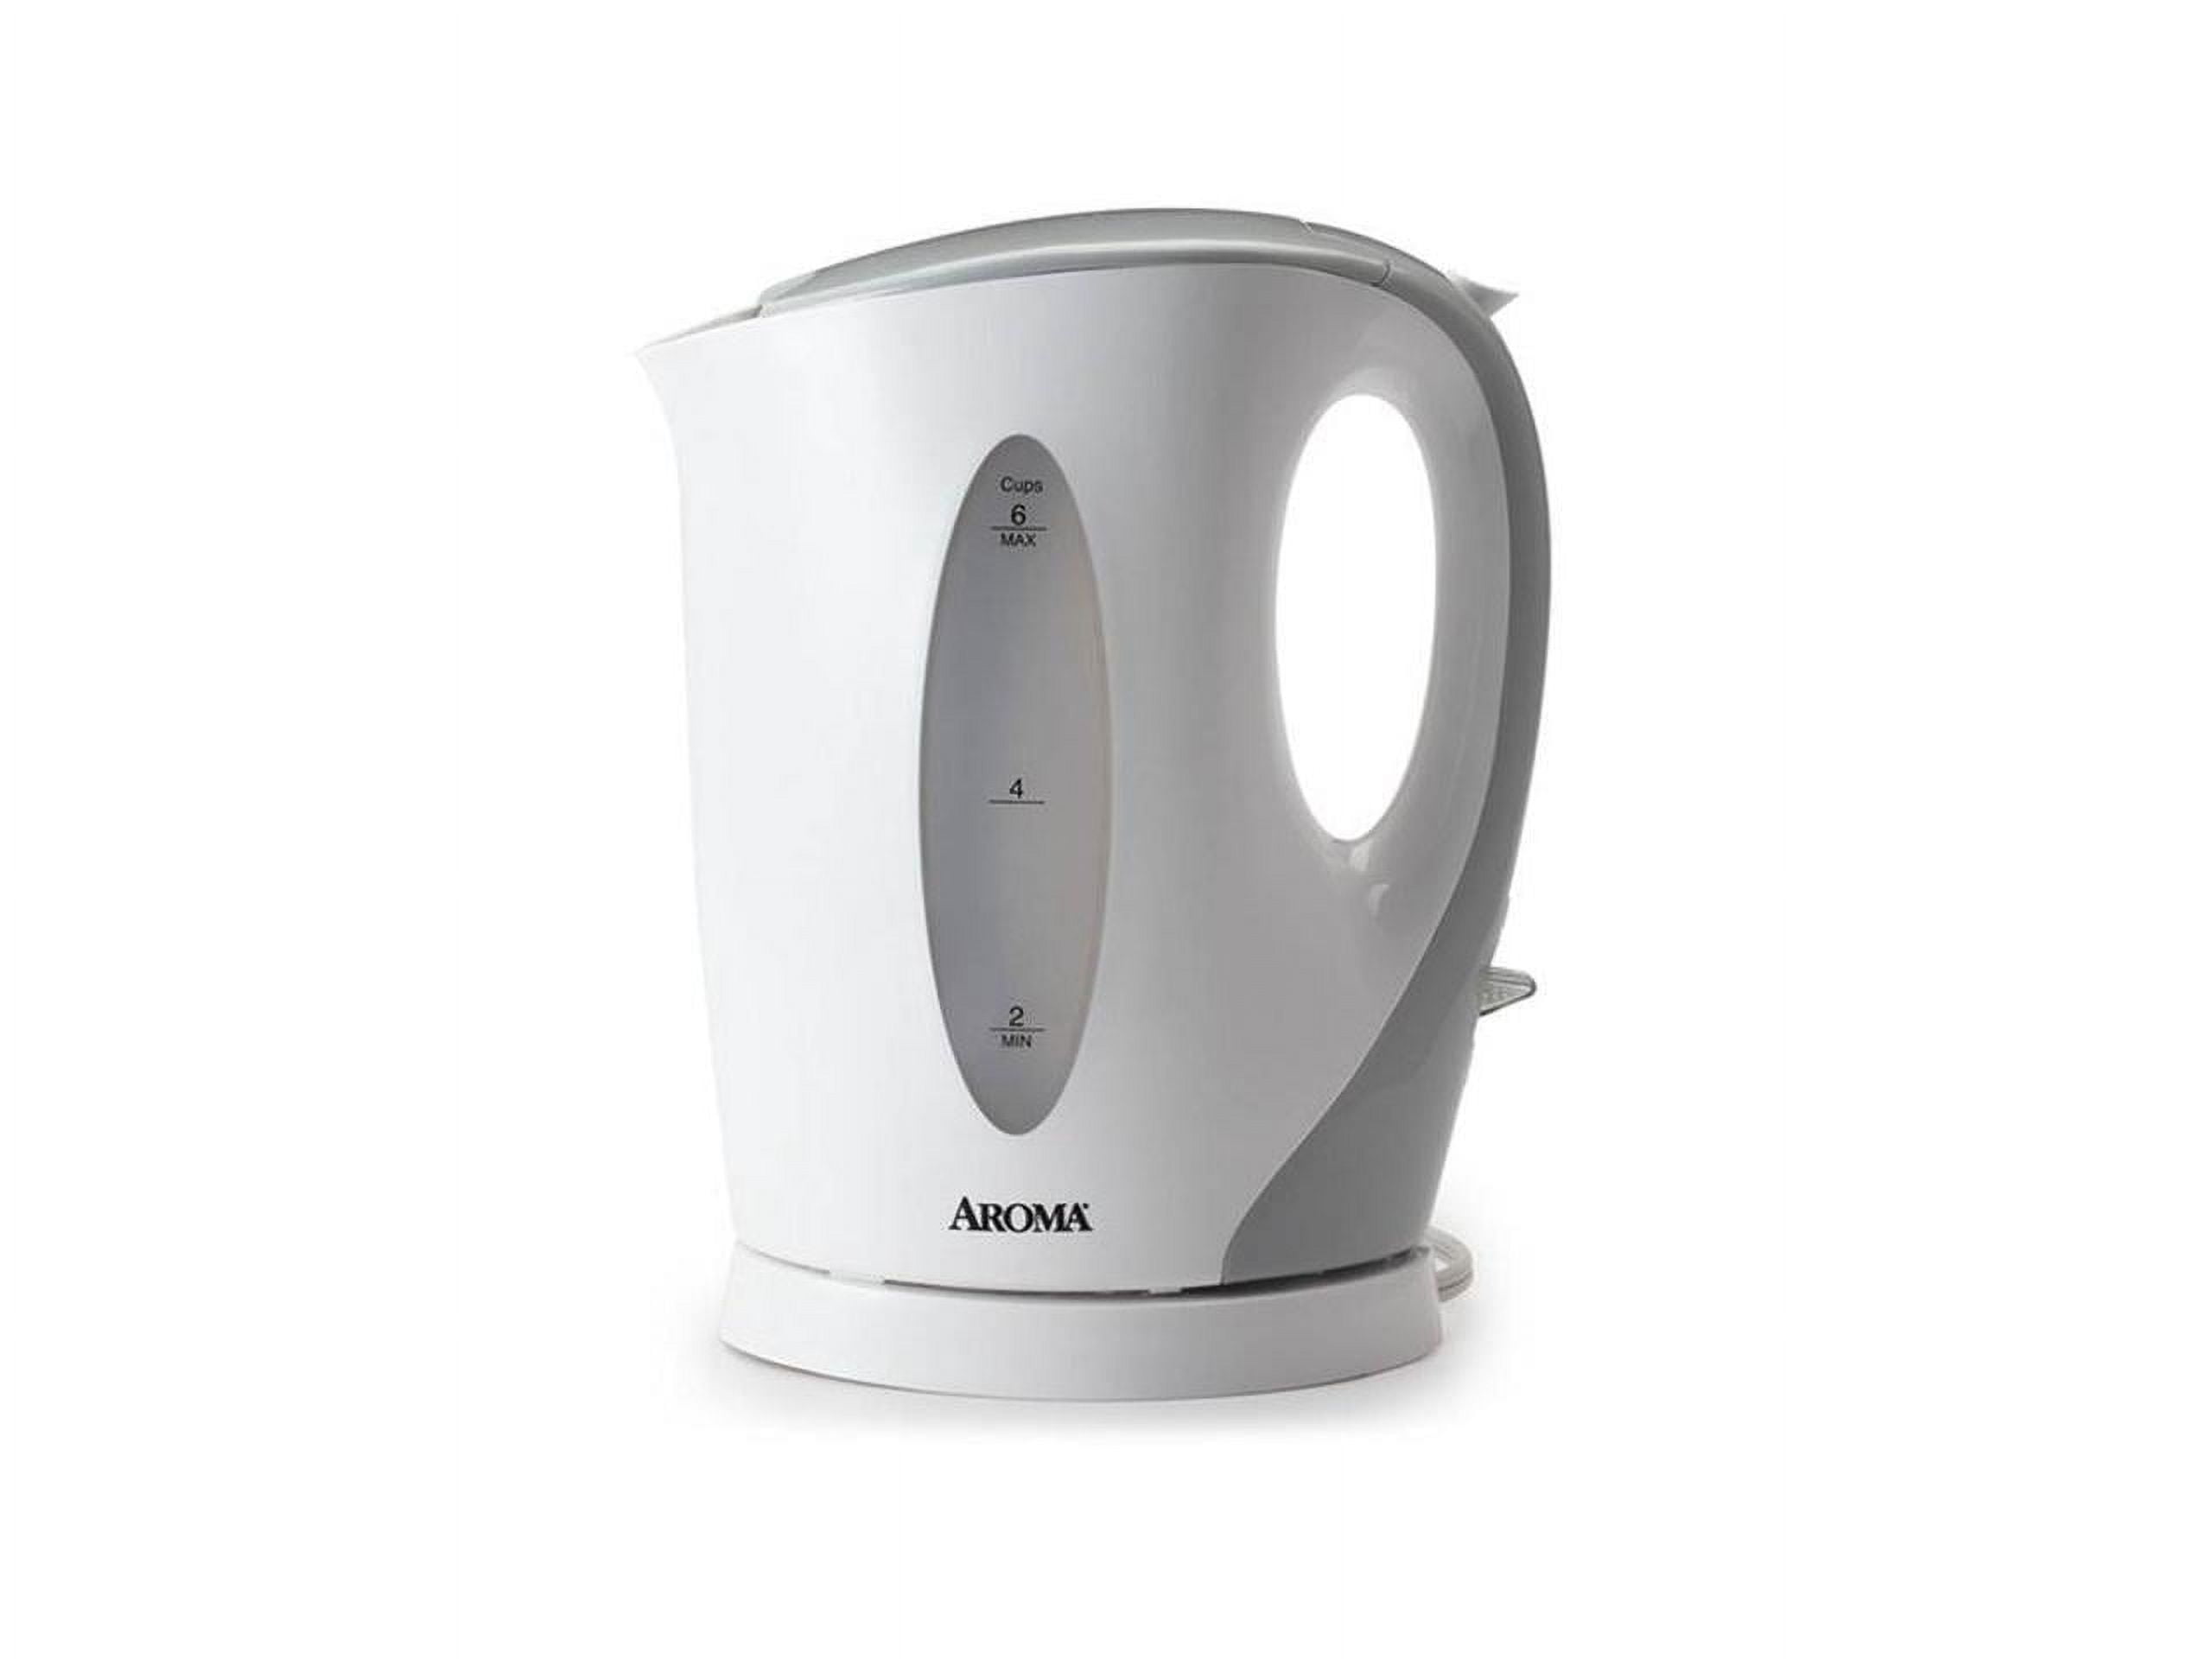 Aroma 1.7-Liter Stainless Steel Electric Kettle Portable Kettle